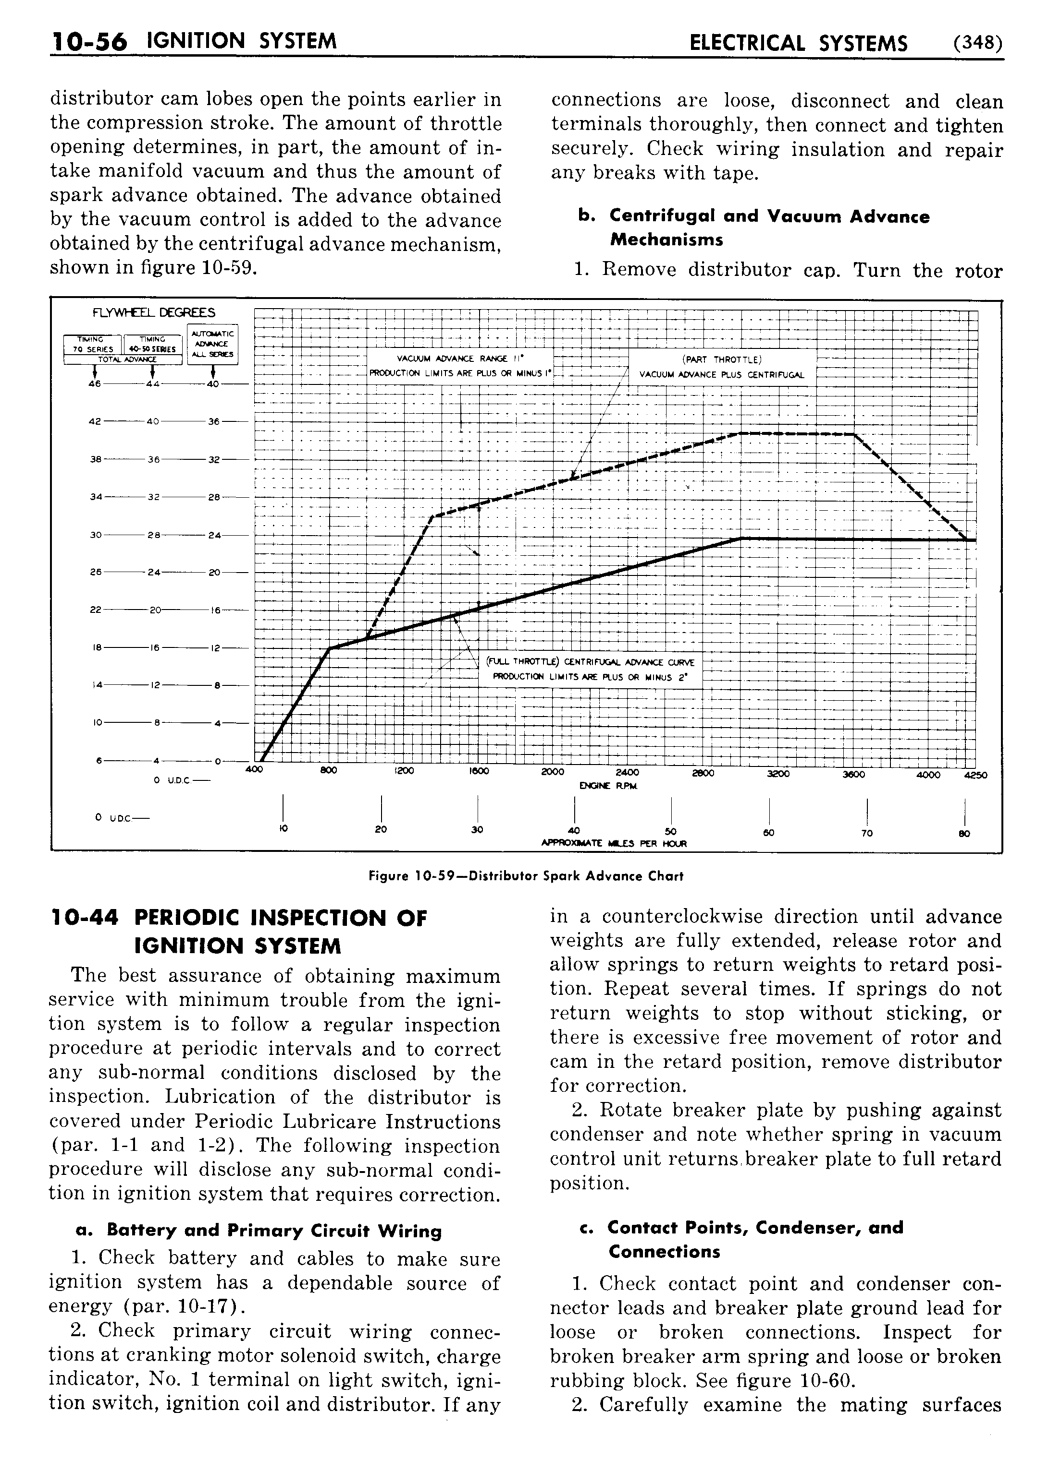 n_11 1951 Buick Shop Manual - Electrical Systems-056-056.jpg